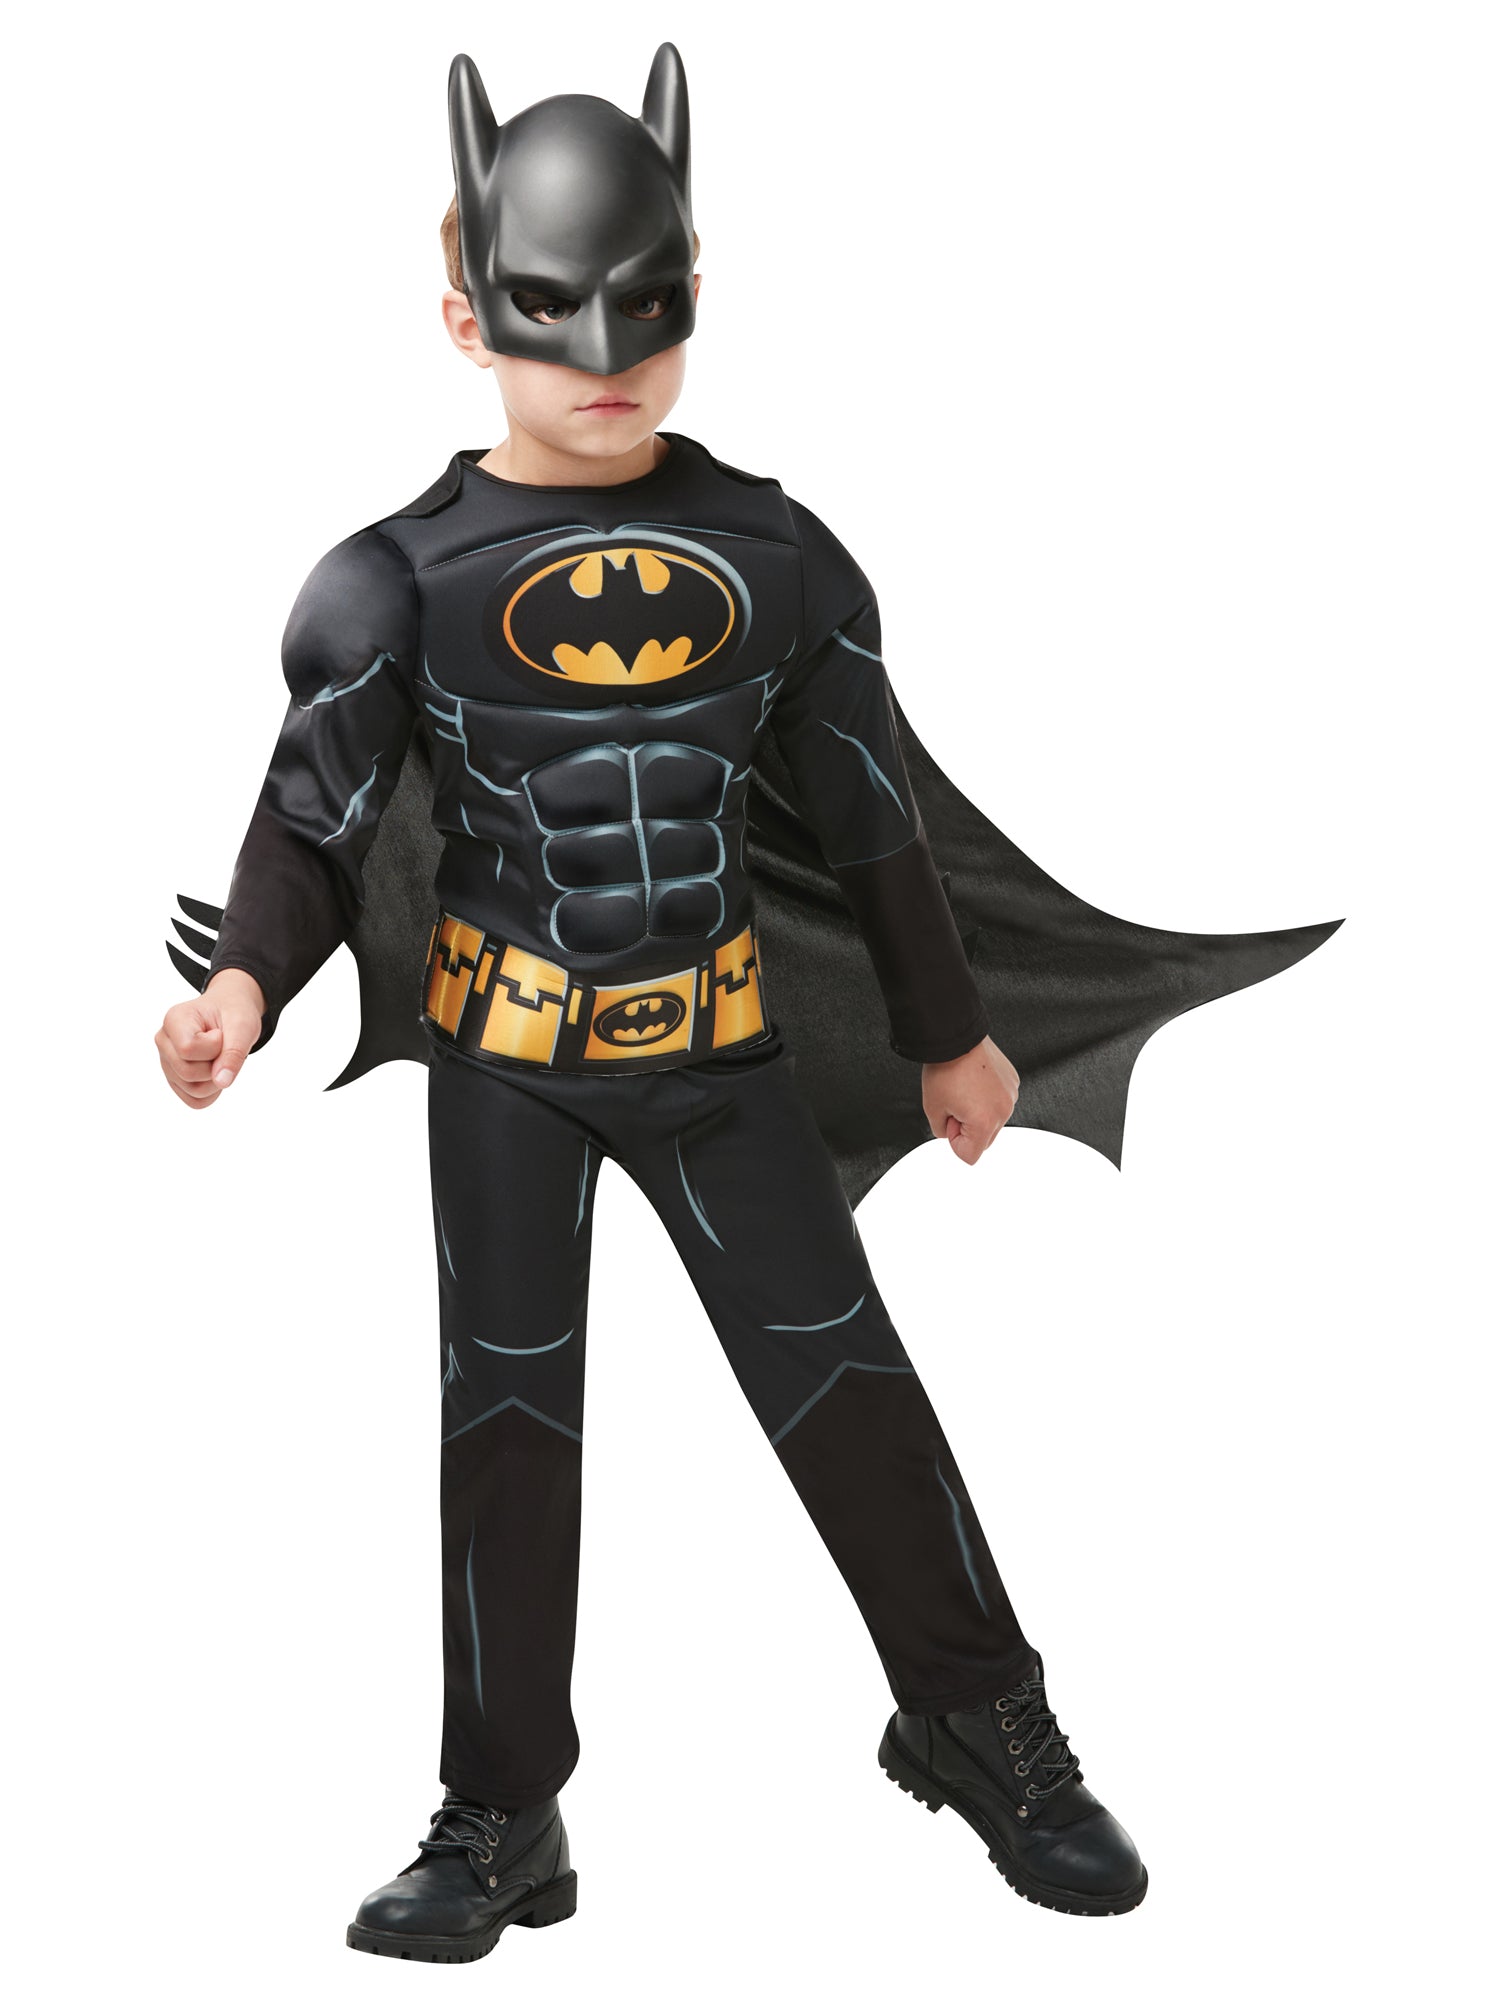 Batman, The Dark Knight, Batman, The Dark Knight, Multi, DC, Kids Costumes, Large, Front